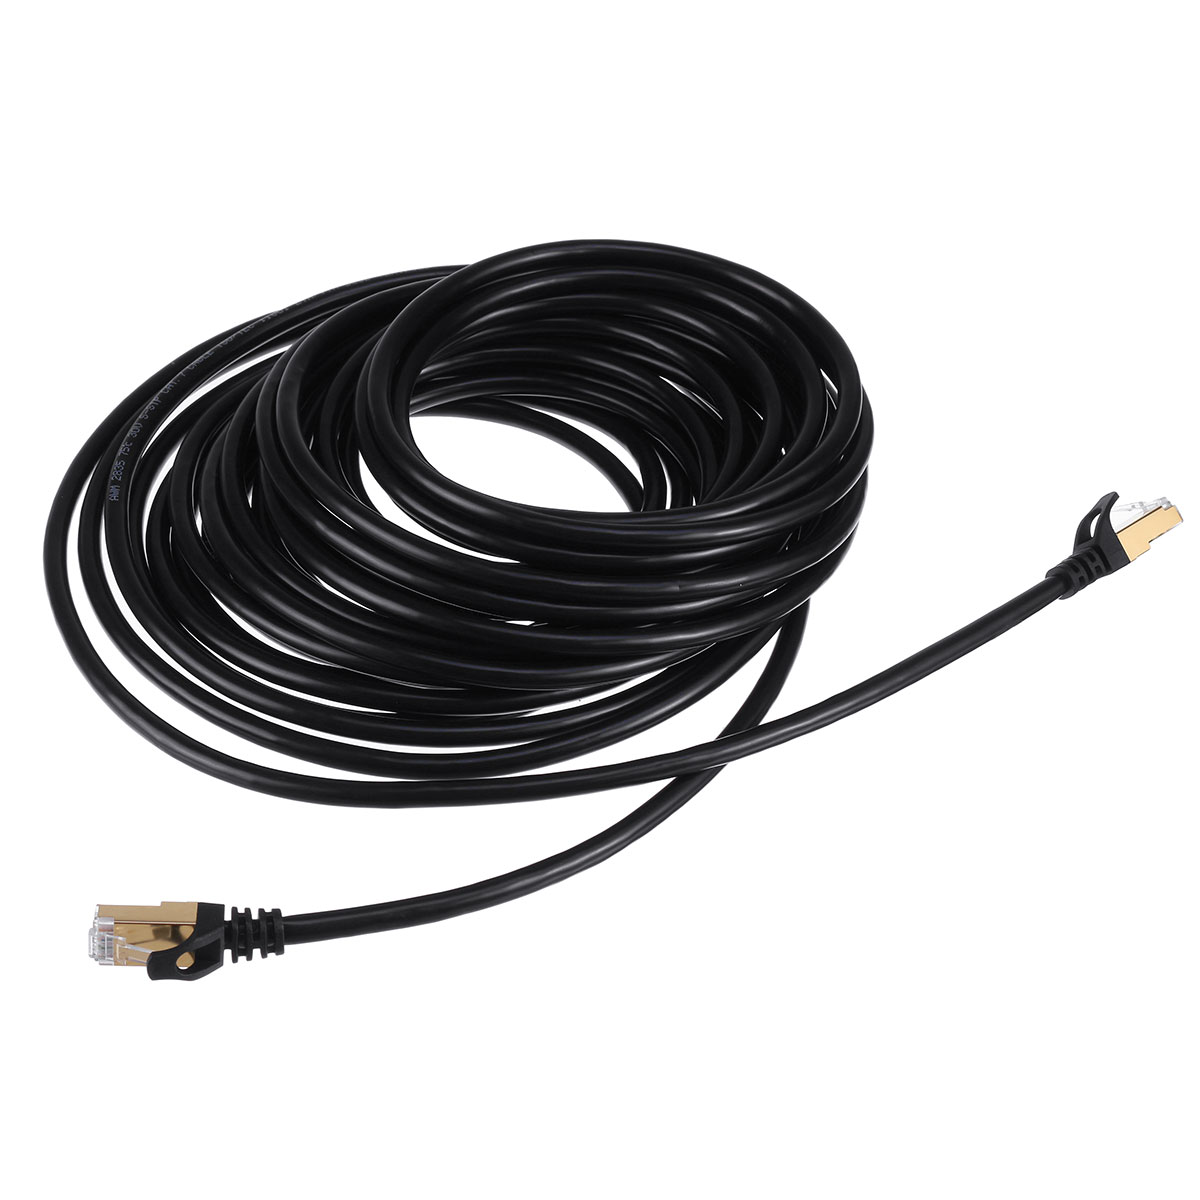 Network Cable Connection Cable Ethernet Cable Black Black 10,0m conecto 